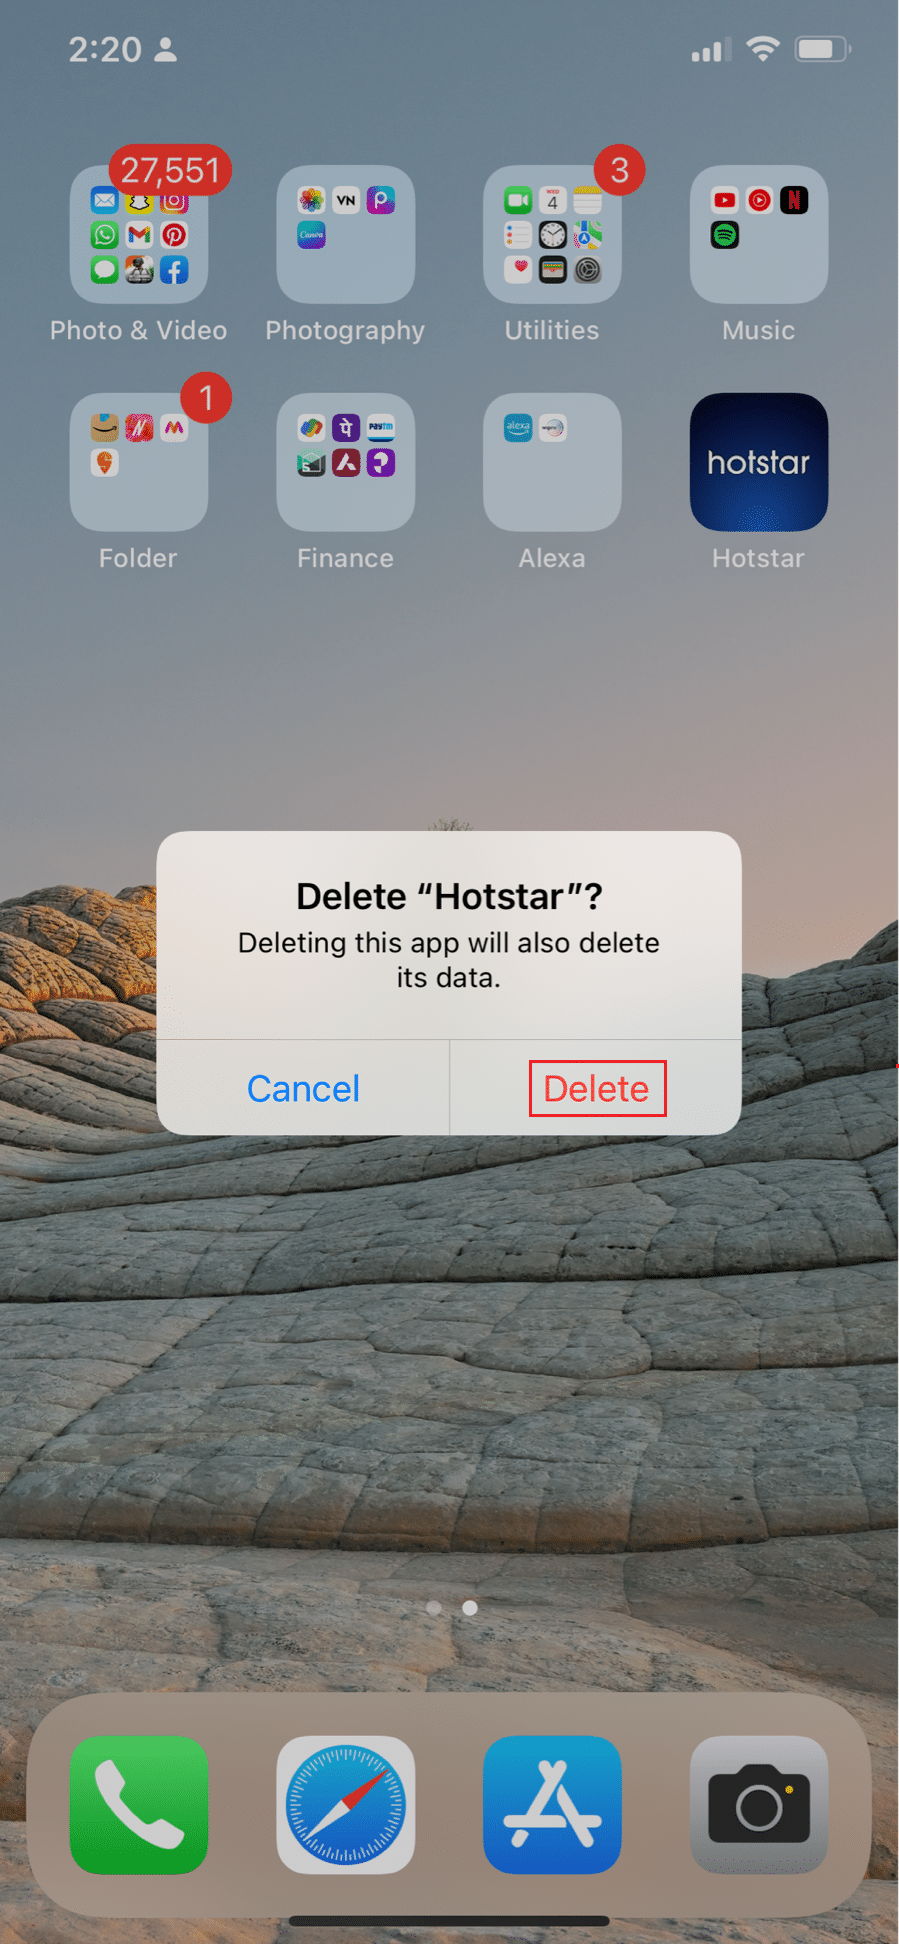 select delete option to uninstall hotstar app in iPhone